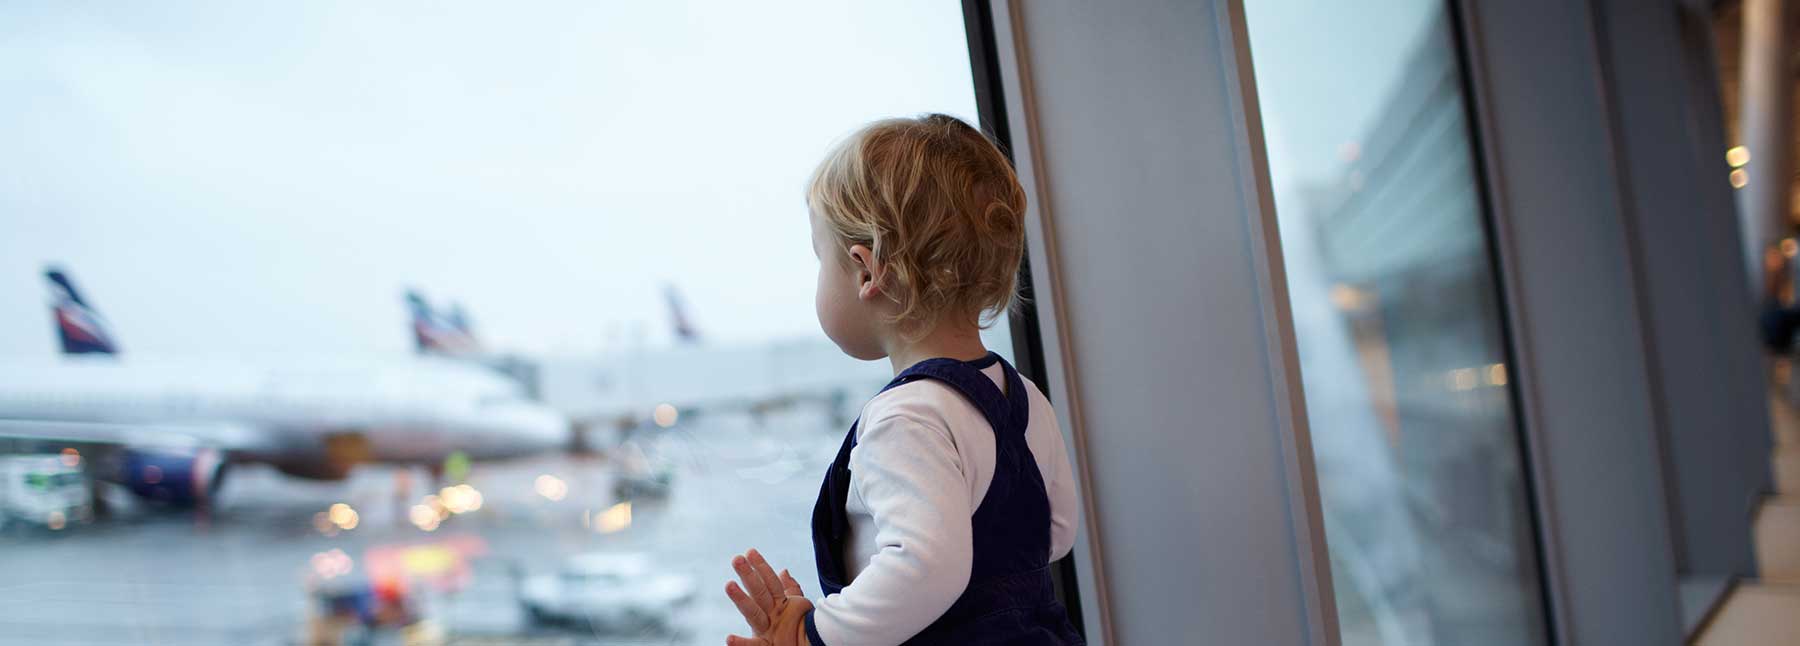 Baby looking at planes